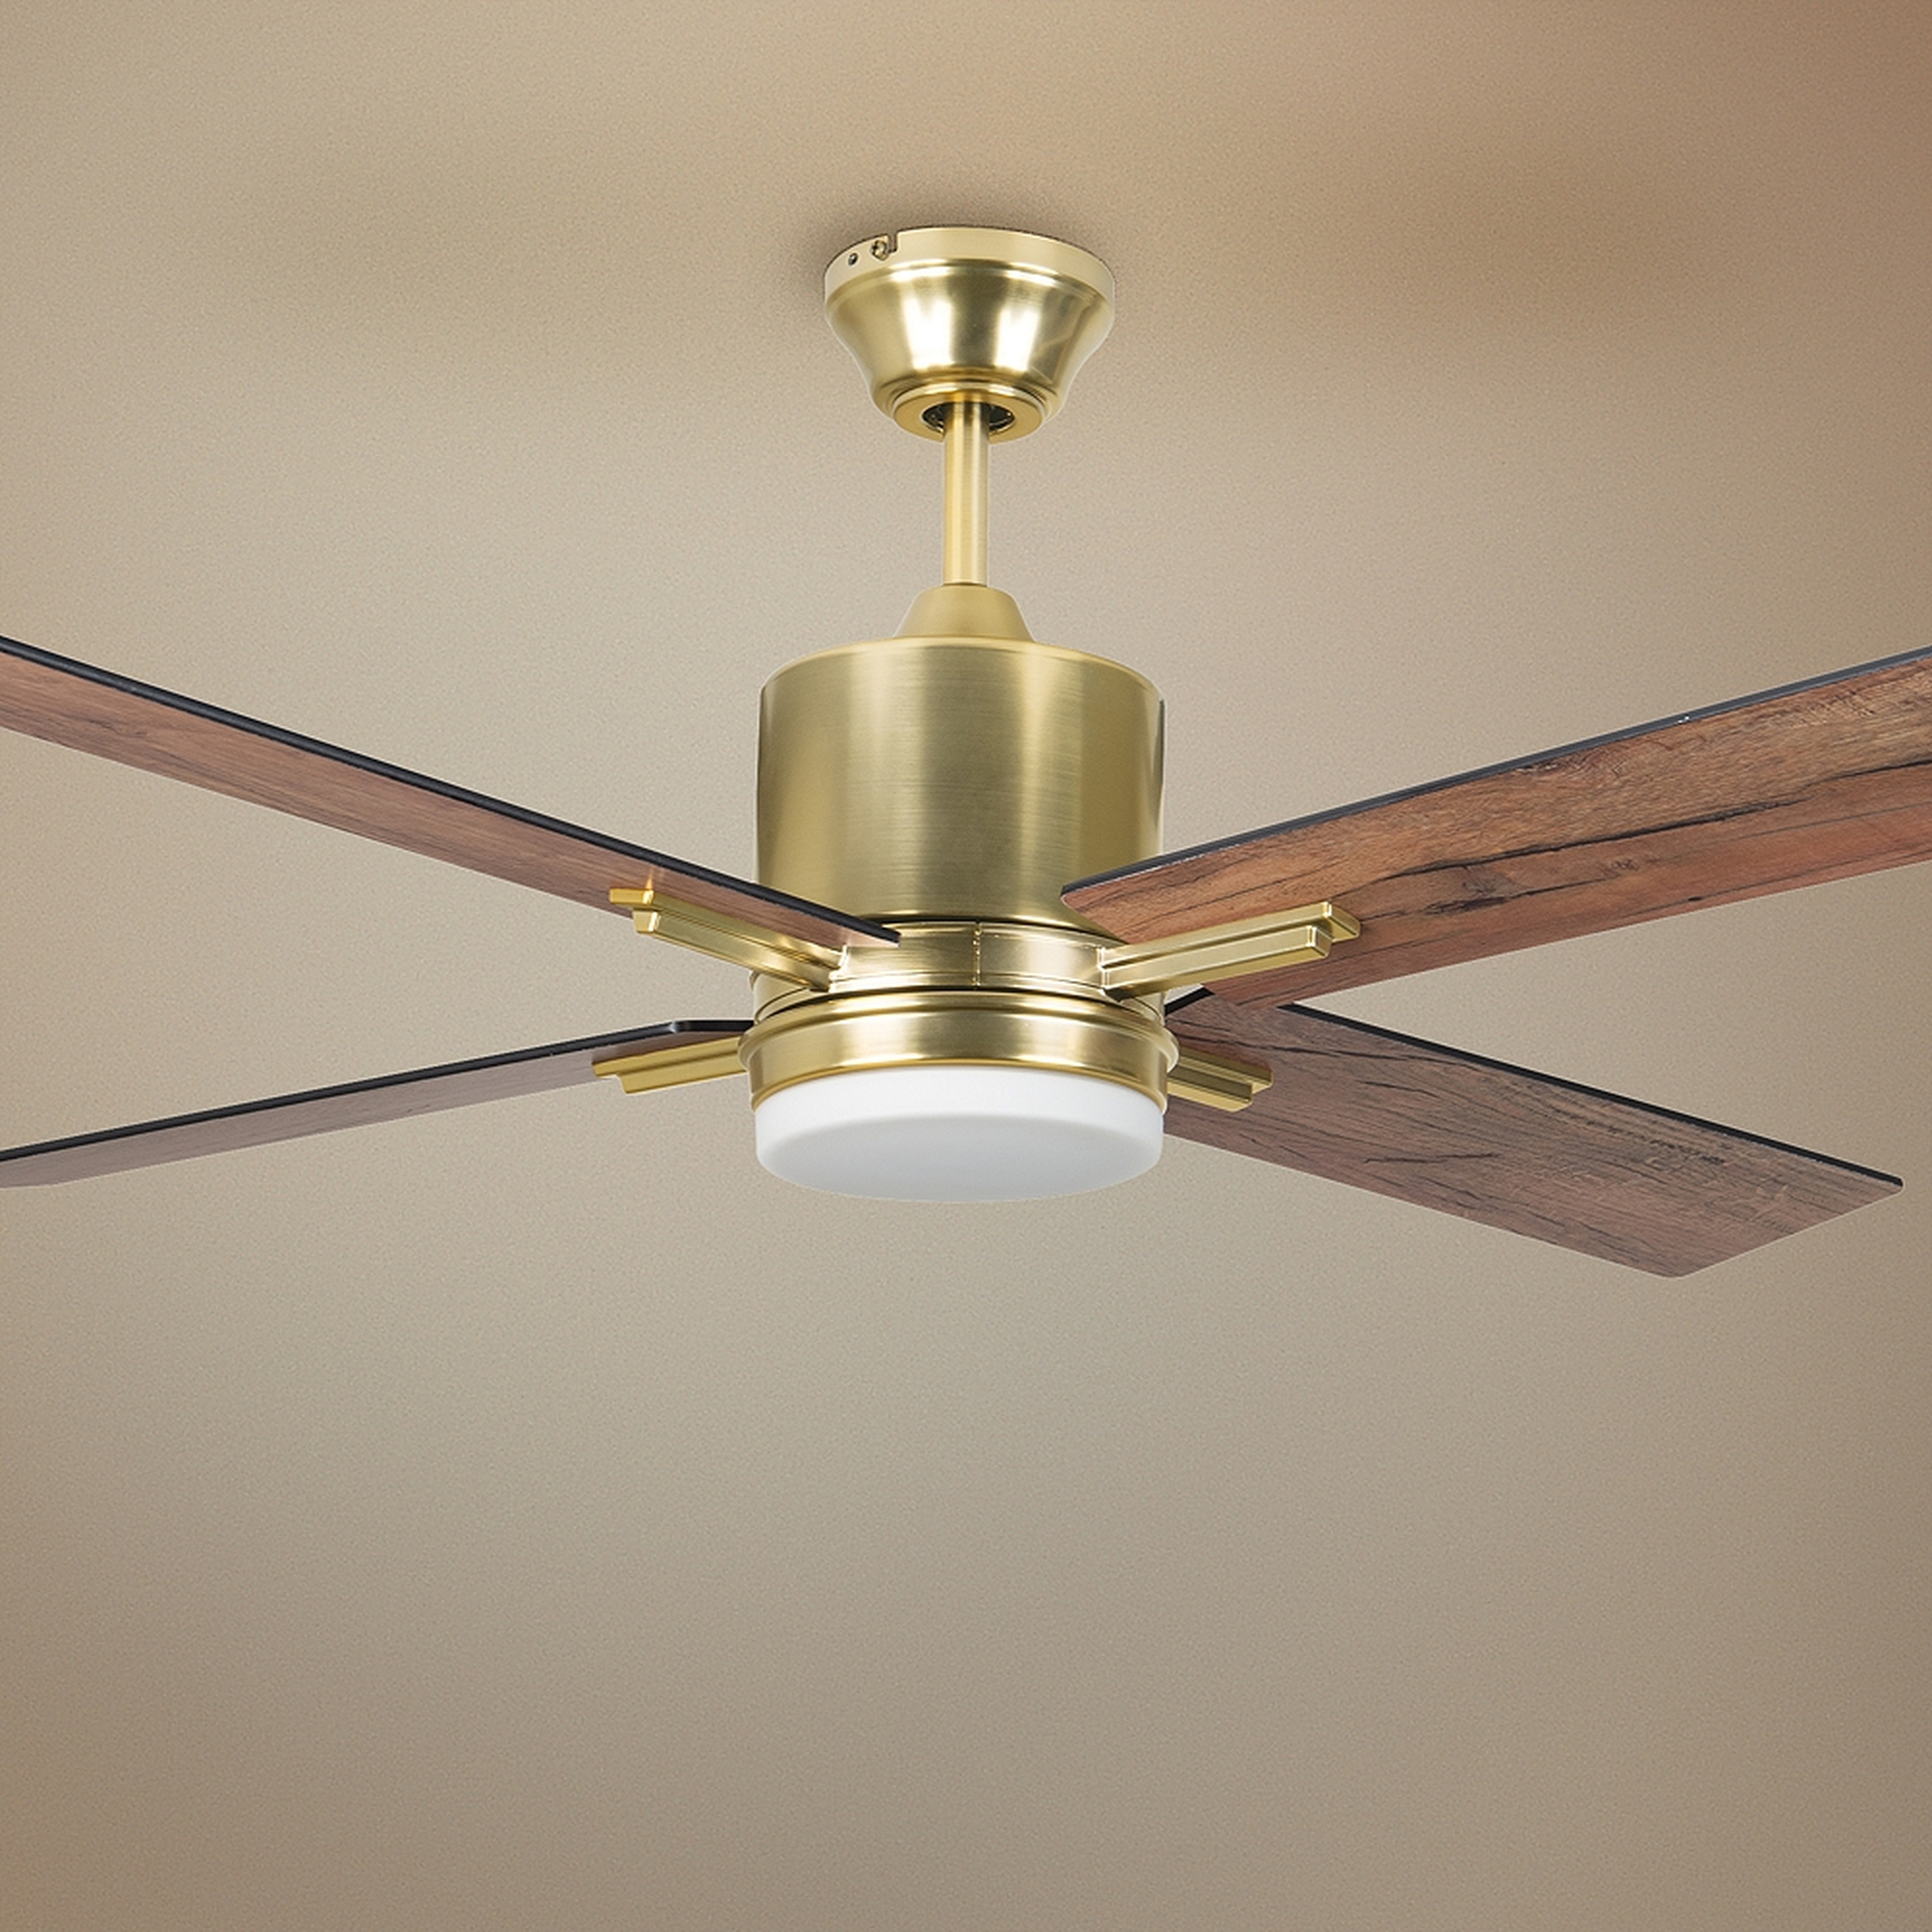 52" Craftmade Teana Satin Brass LED Ceiling Fan - Style # 74R08 - Lamps Plus